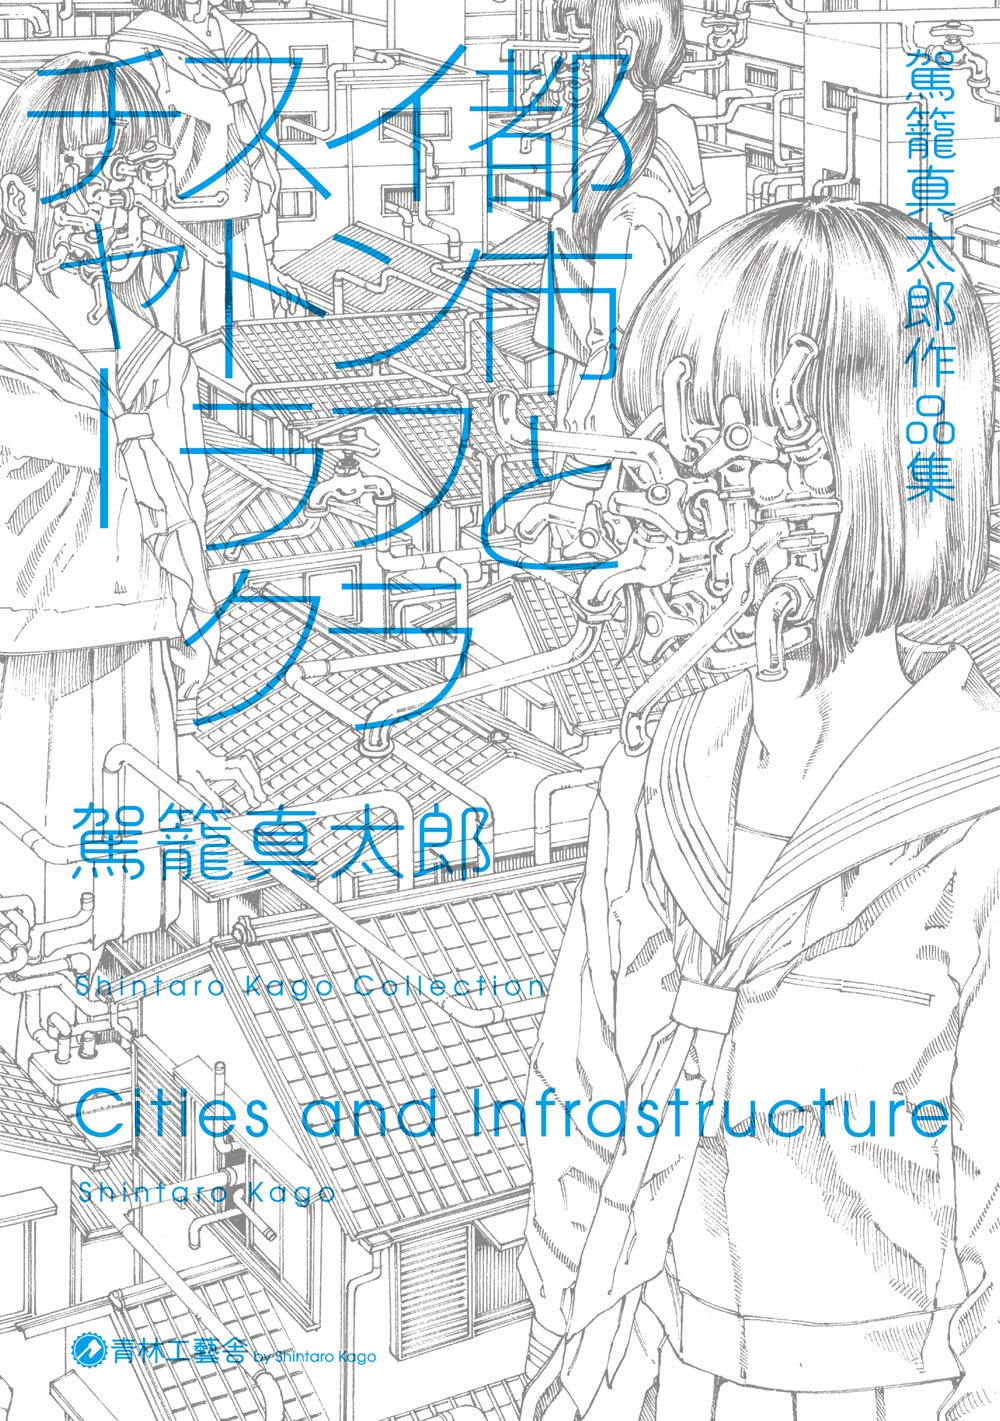 Shintaro Kago "Cities and Infrastructure" SIGNED